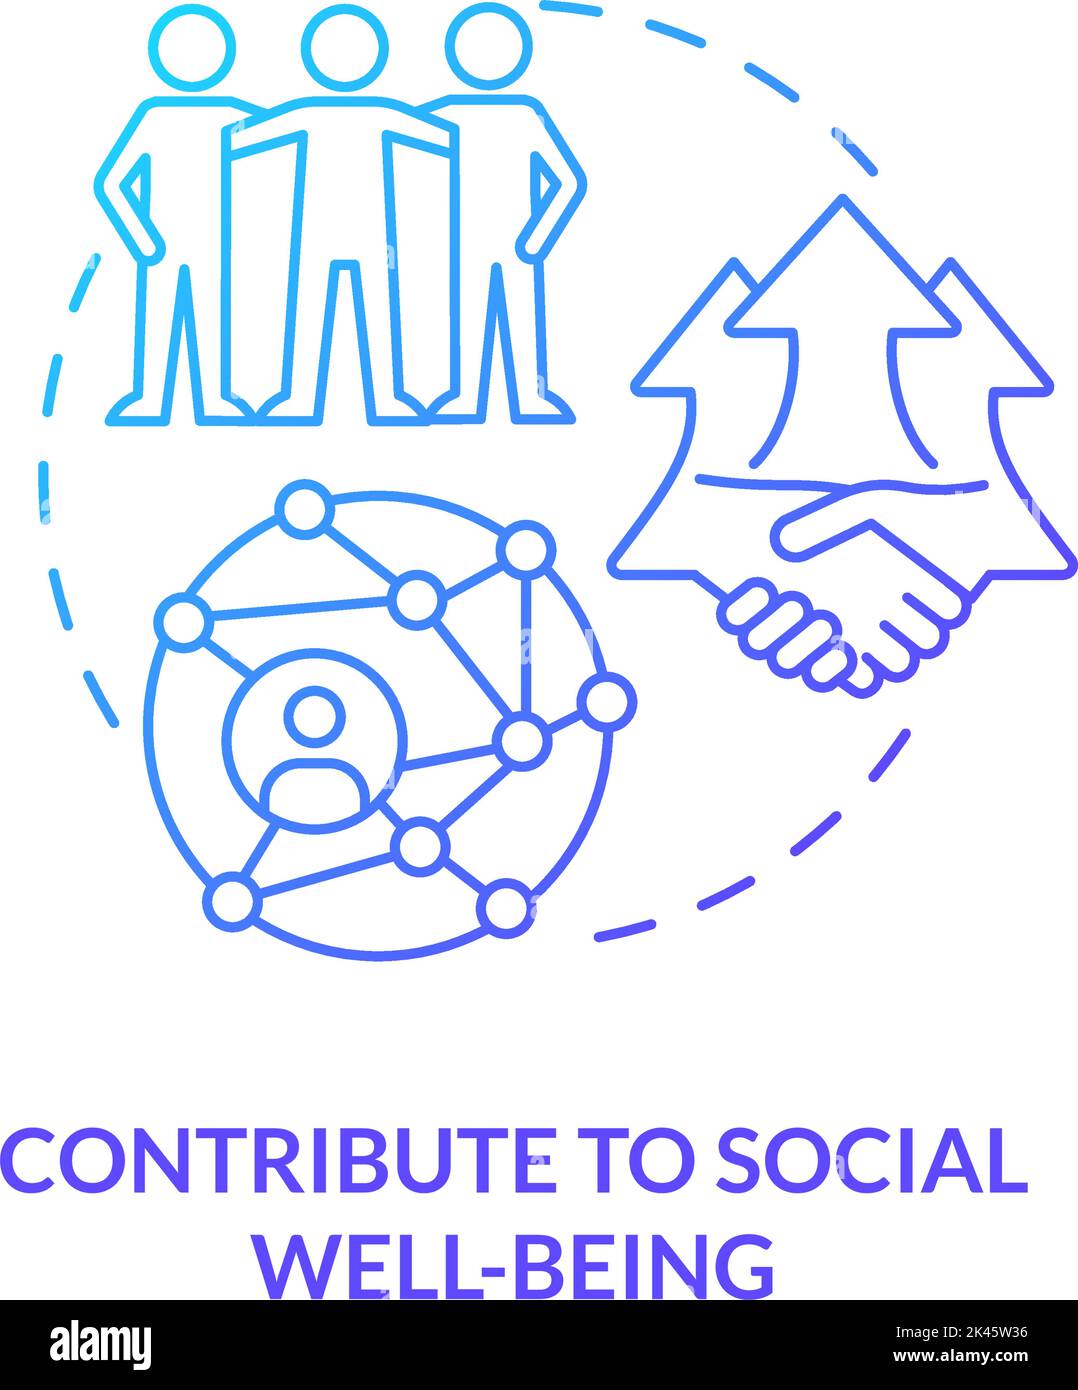 Contribute to social well-being blue gradient concept icon Stock Vector